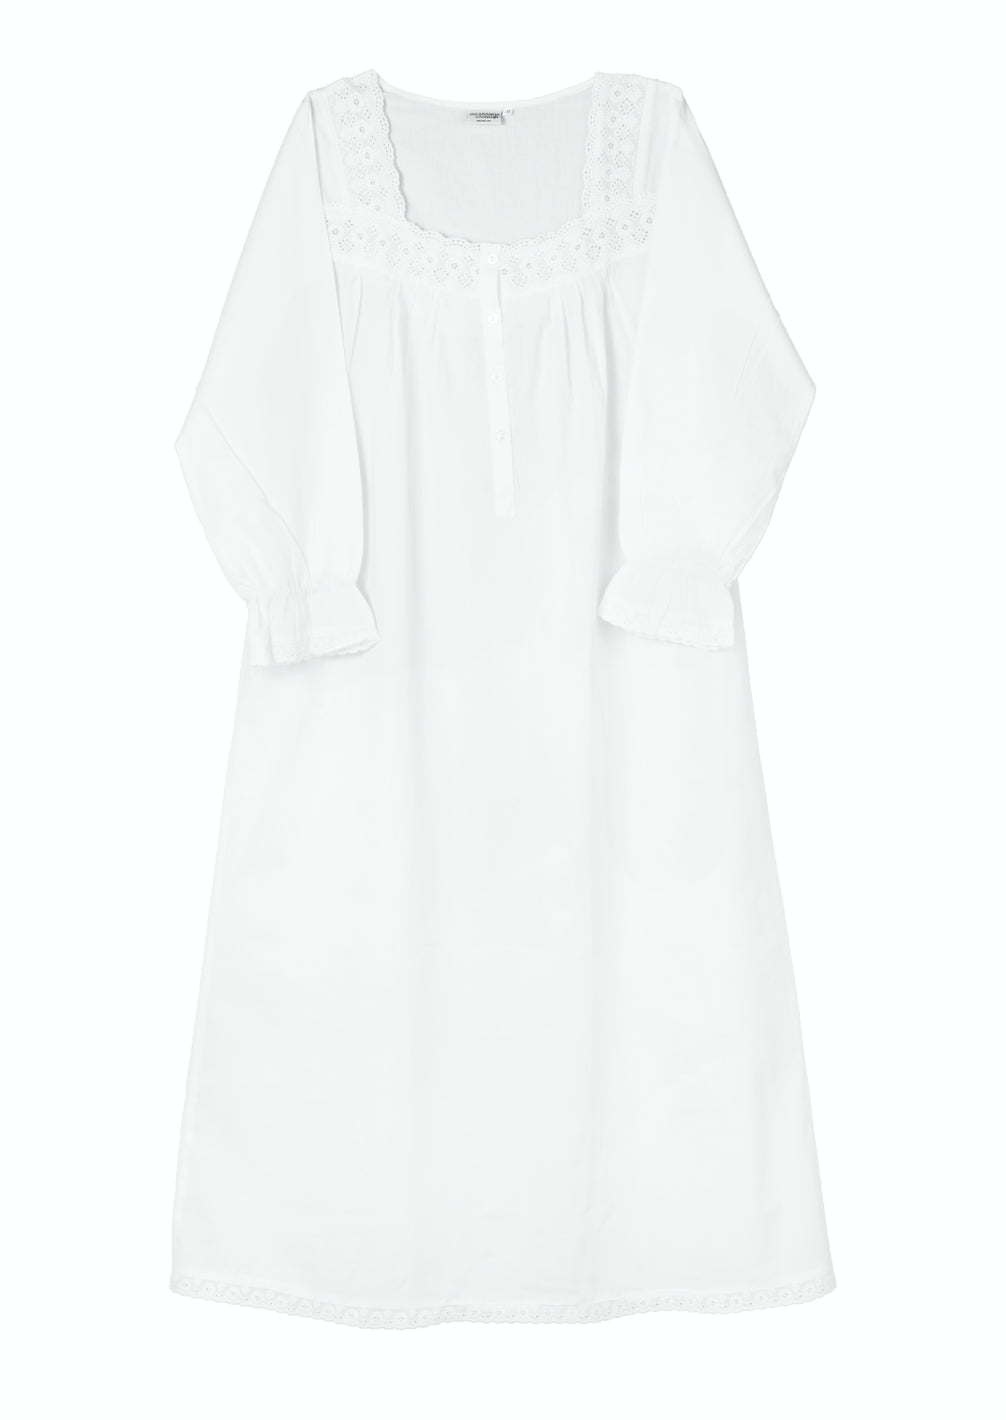 Susan White Cotton Long Sleeve Moon Over The Nightgown 